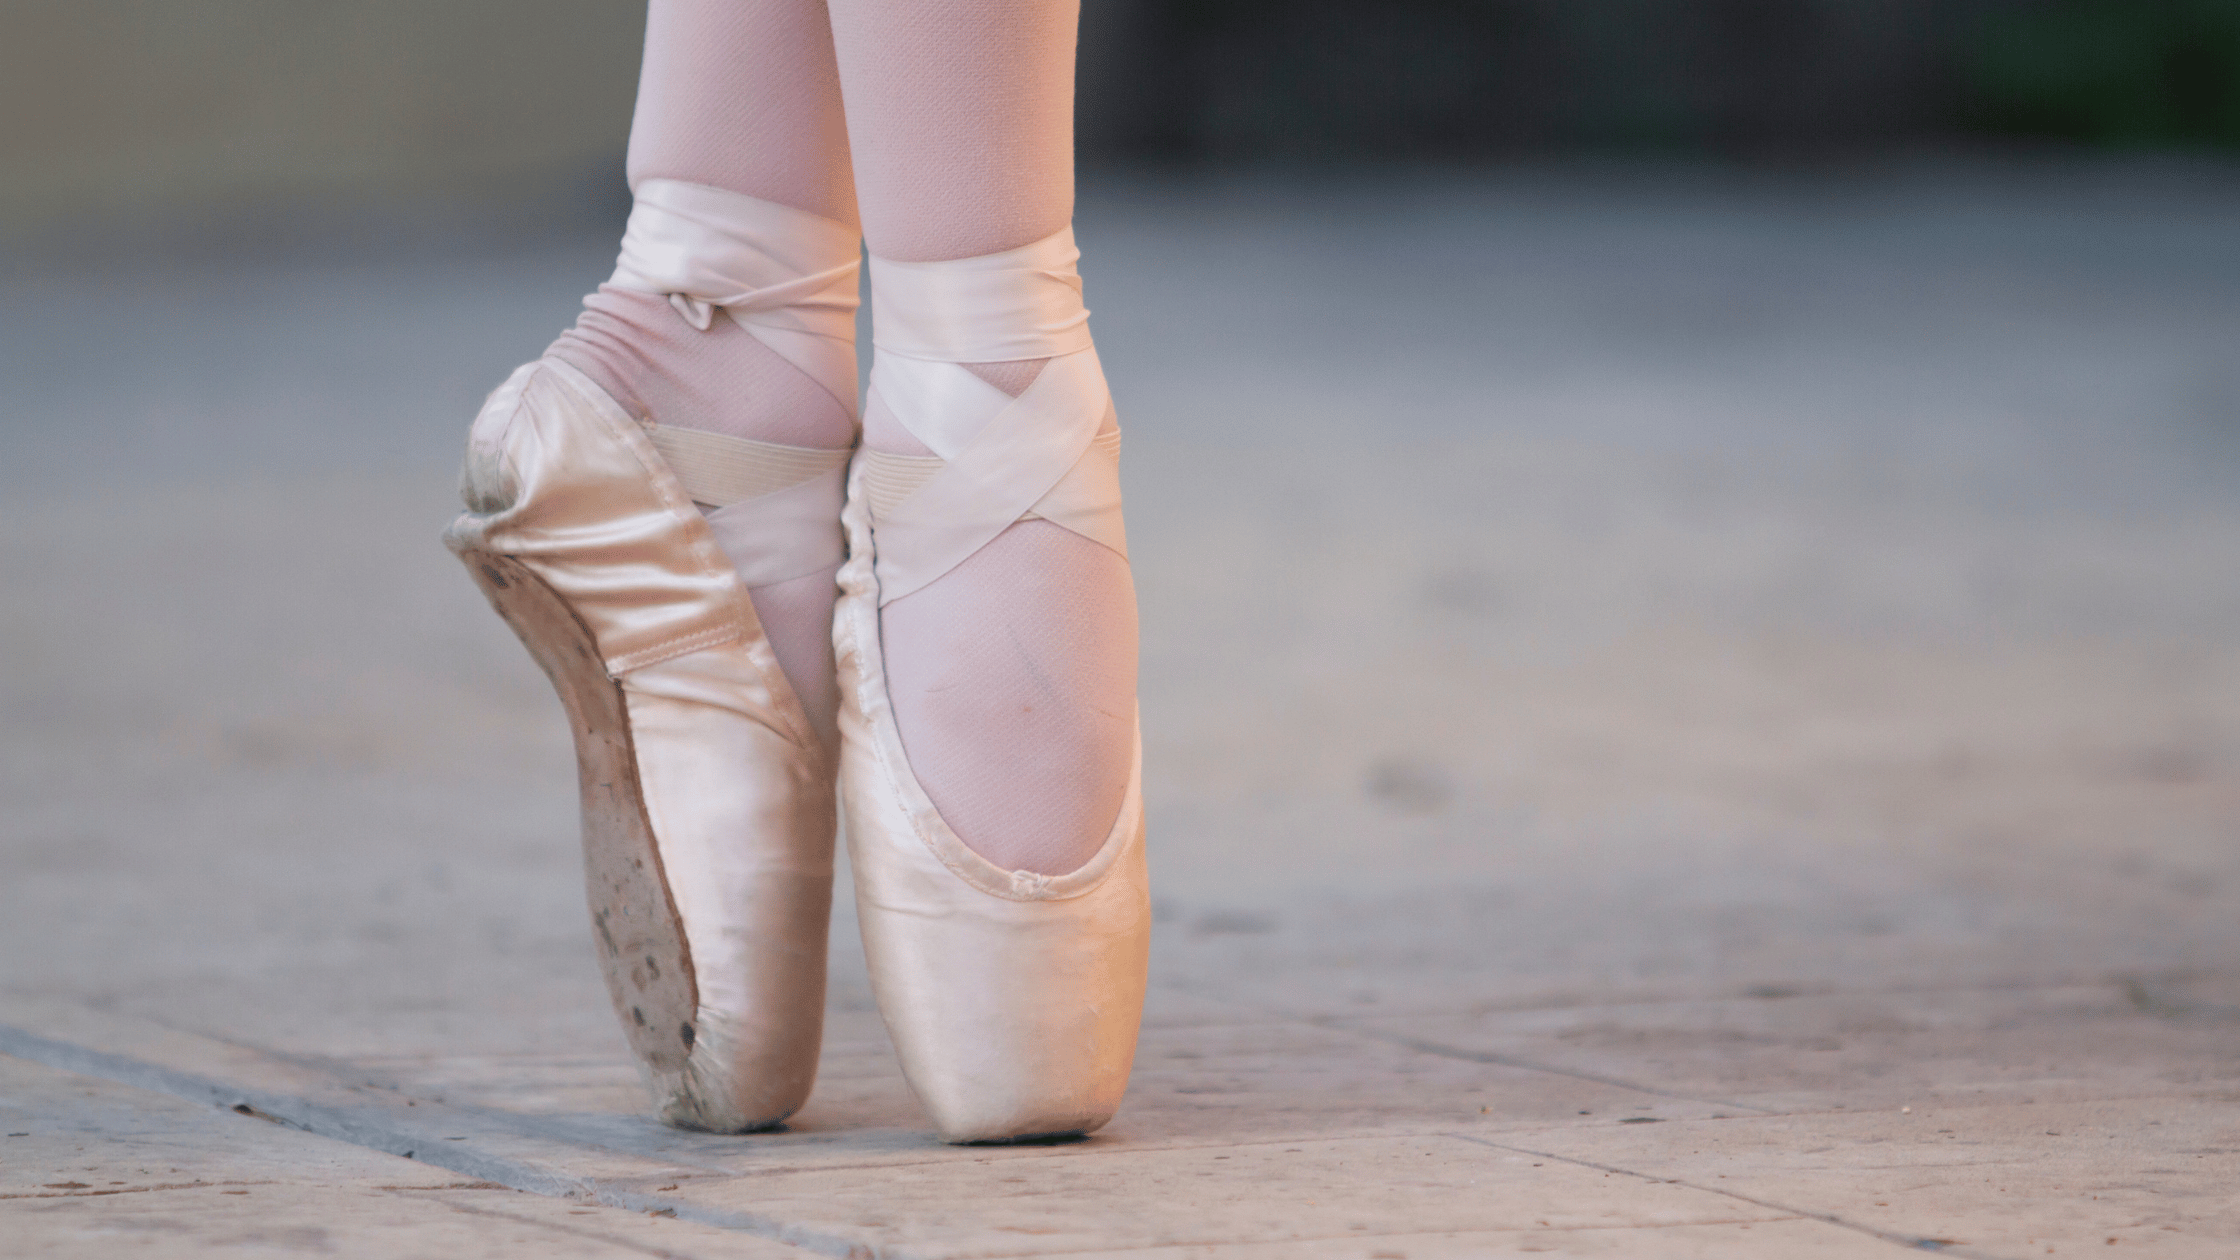 Caring for Your Feet: Essential Tips for Pointe Dancers and the Role of Physical Therapy